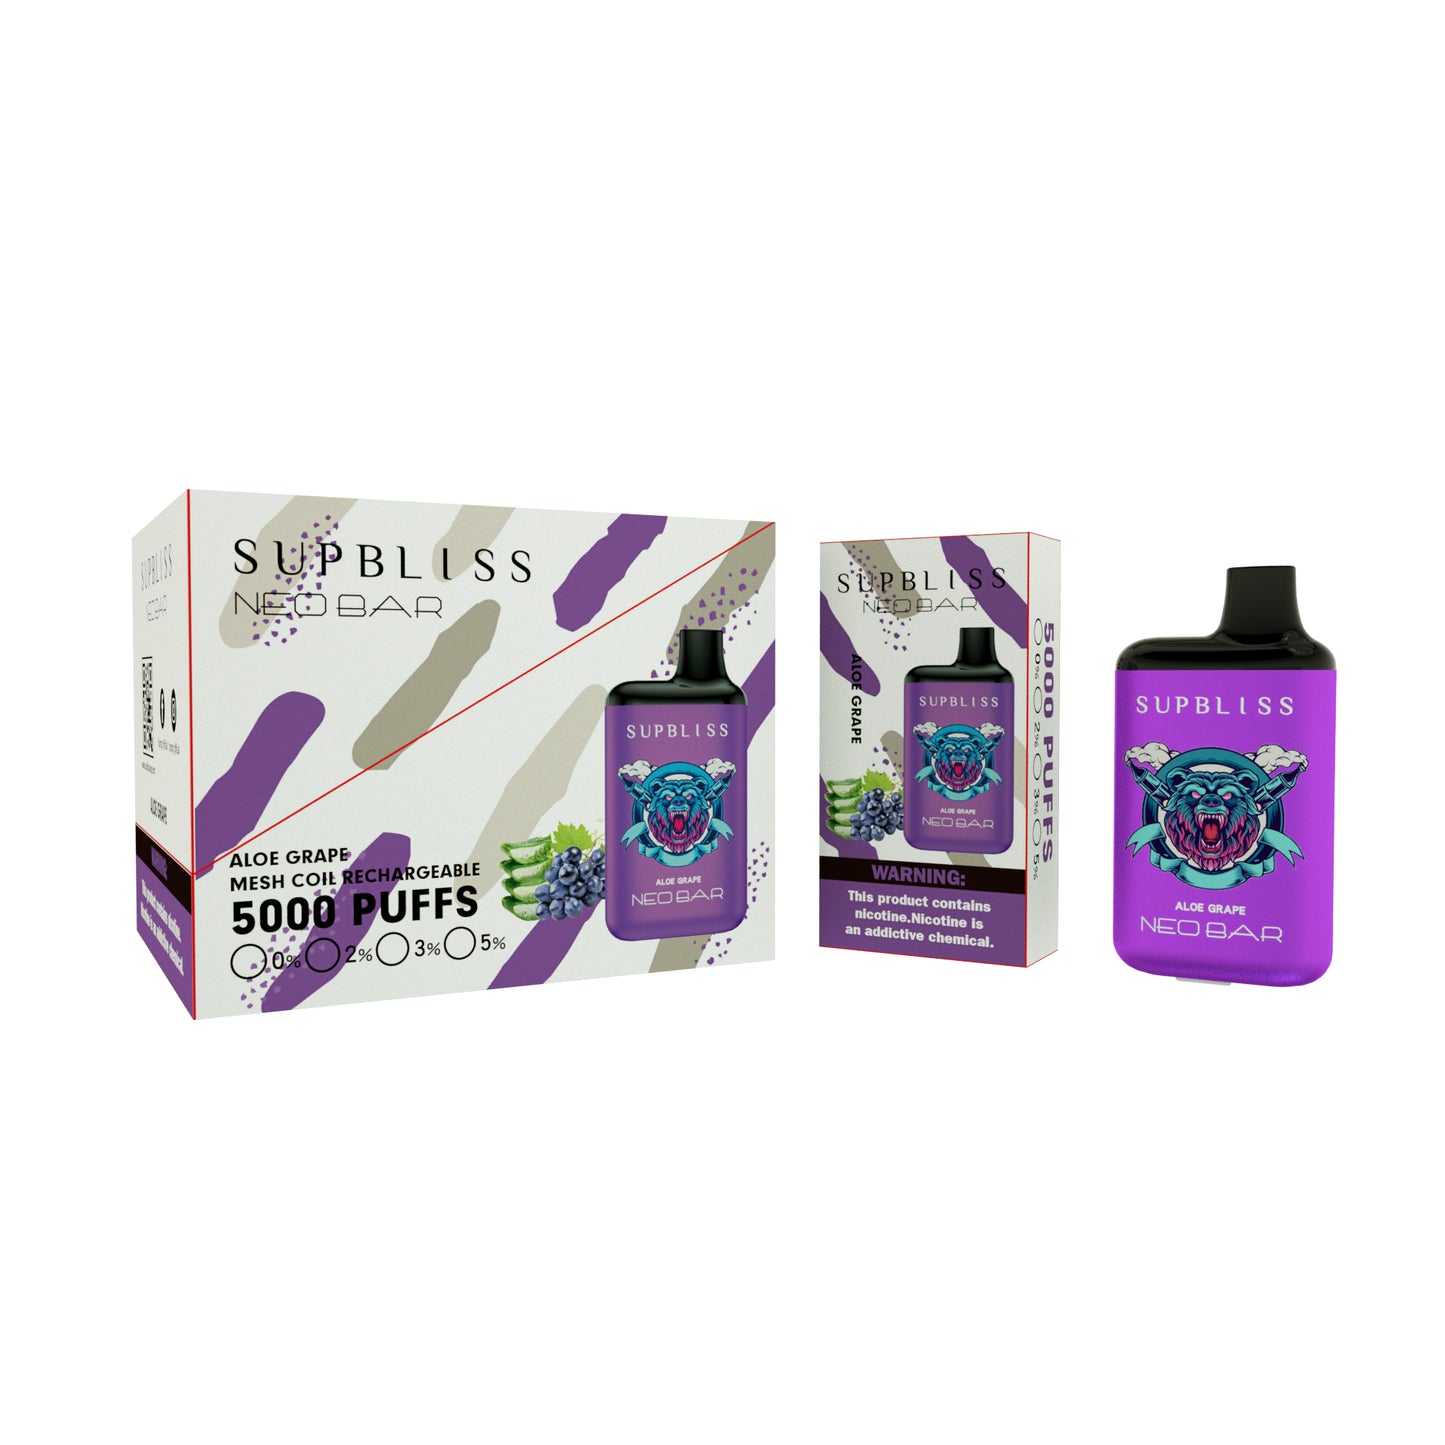 Supbliss Neo Bar 5000 Disposable Vape, 13 Flavors and 4 Nicotine Strengths Available